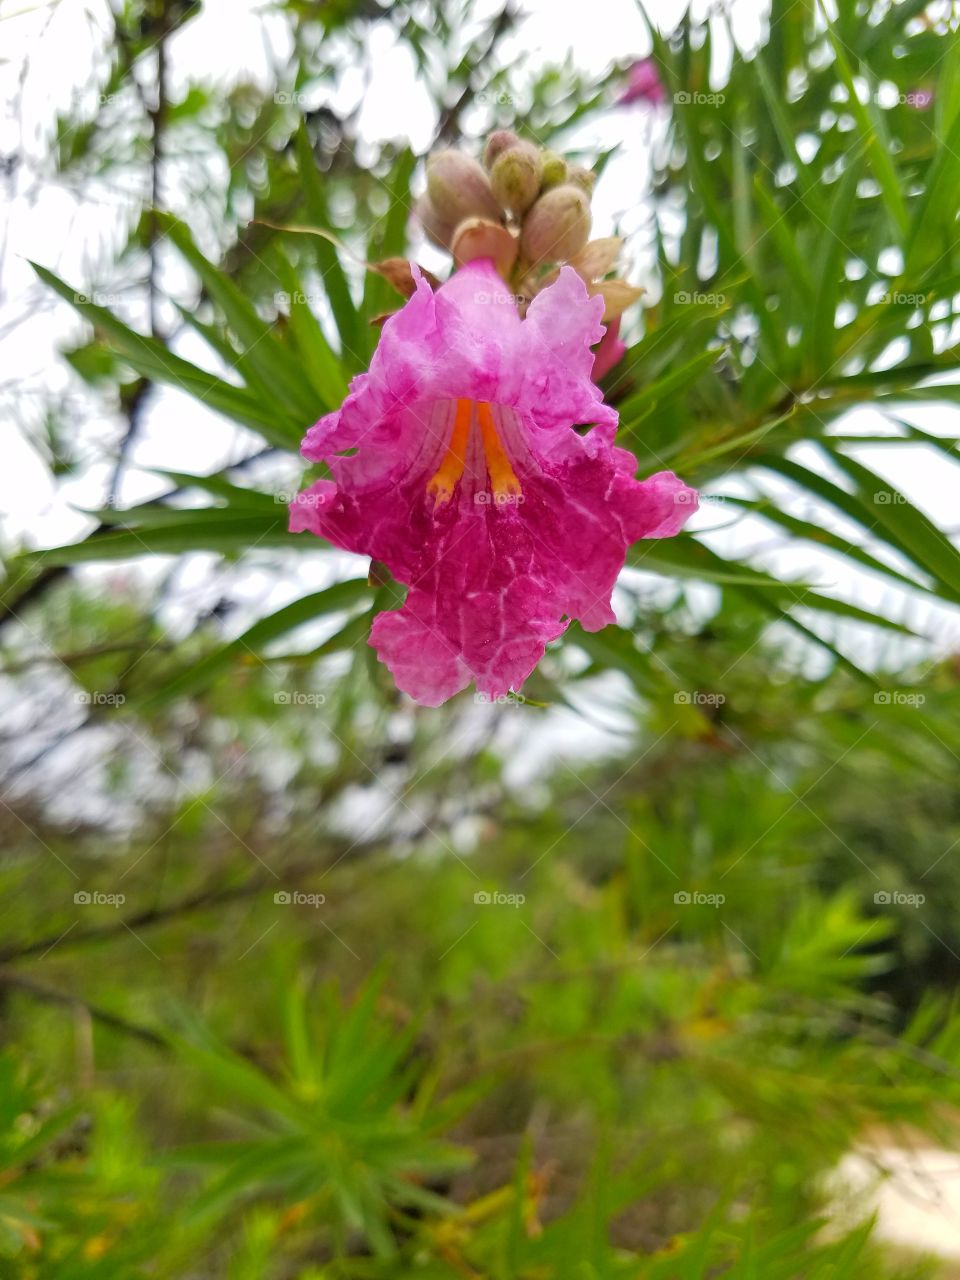 Desert Willow up close & personal